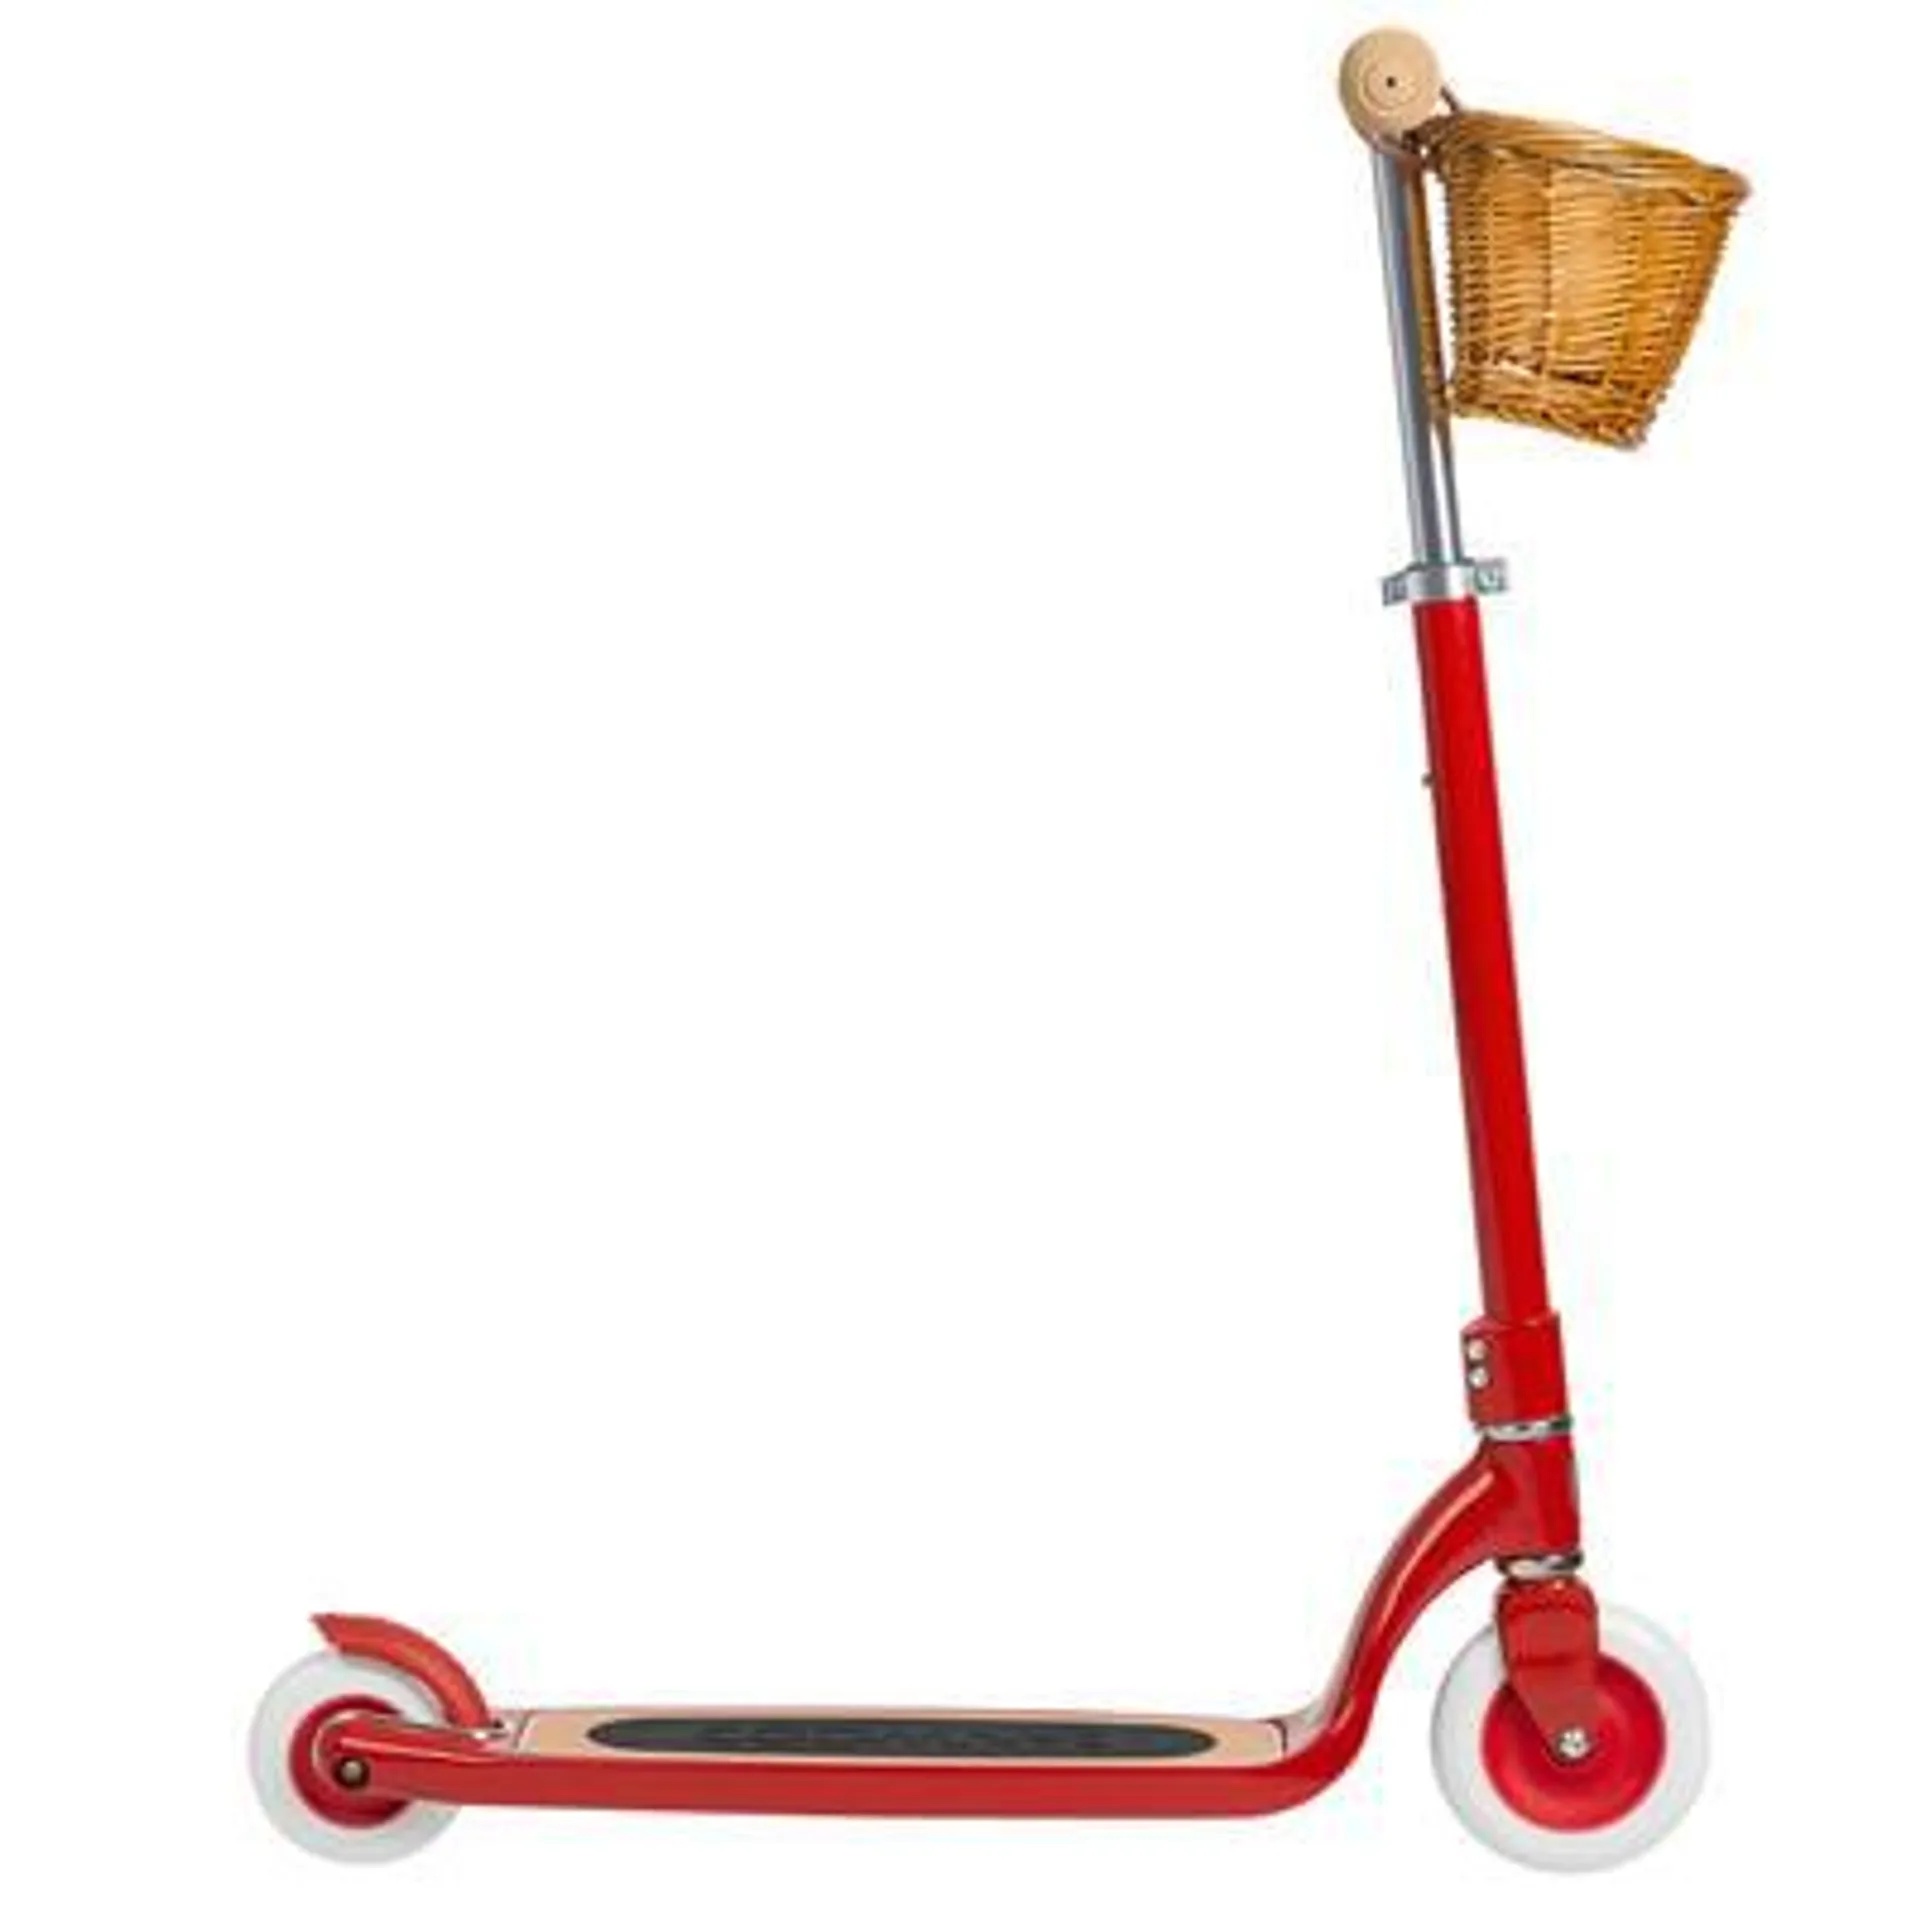 Banwood Step maxi scooter - red